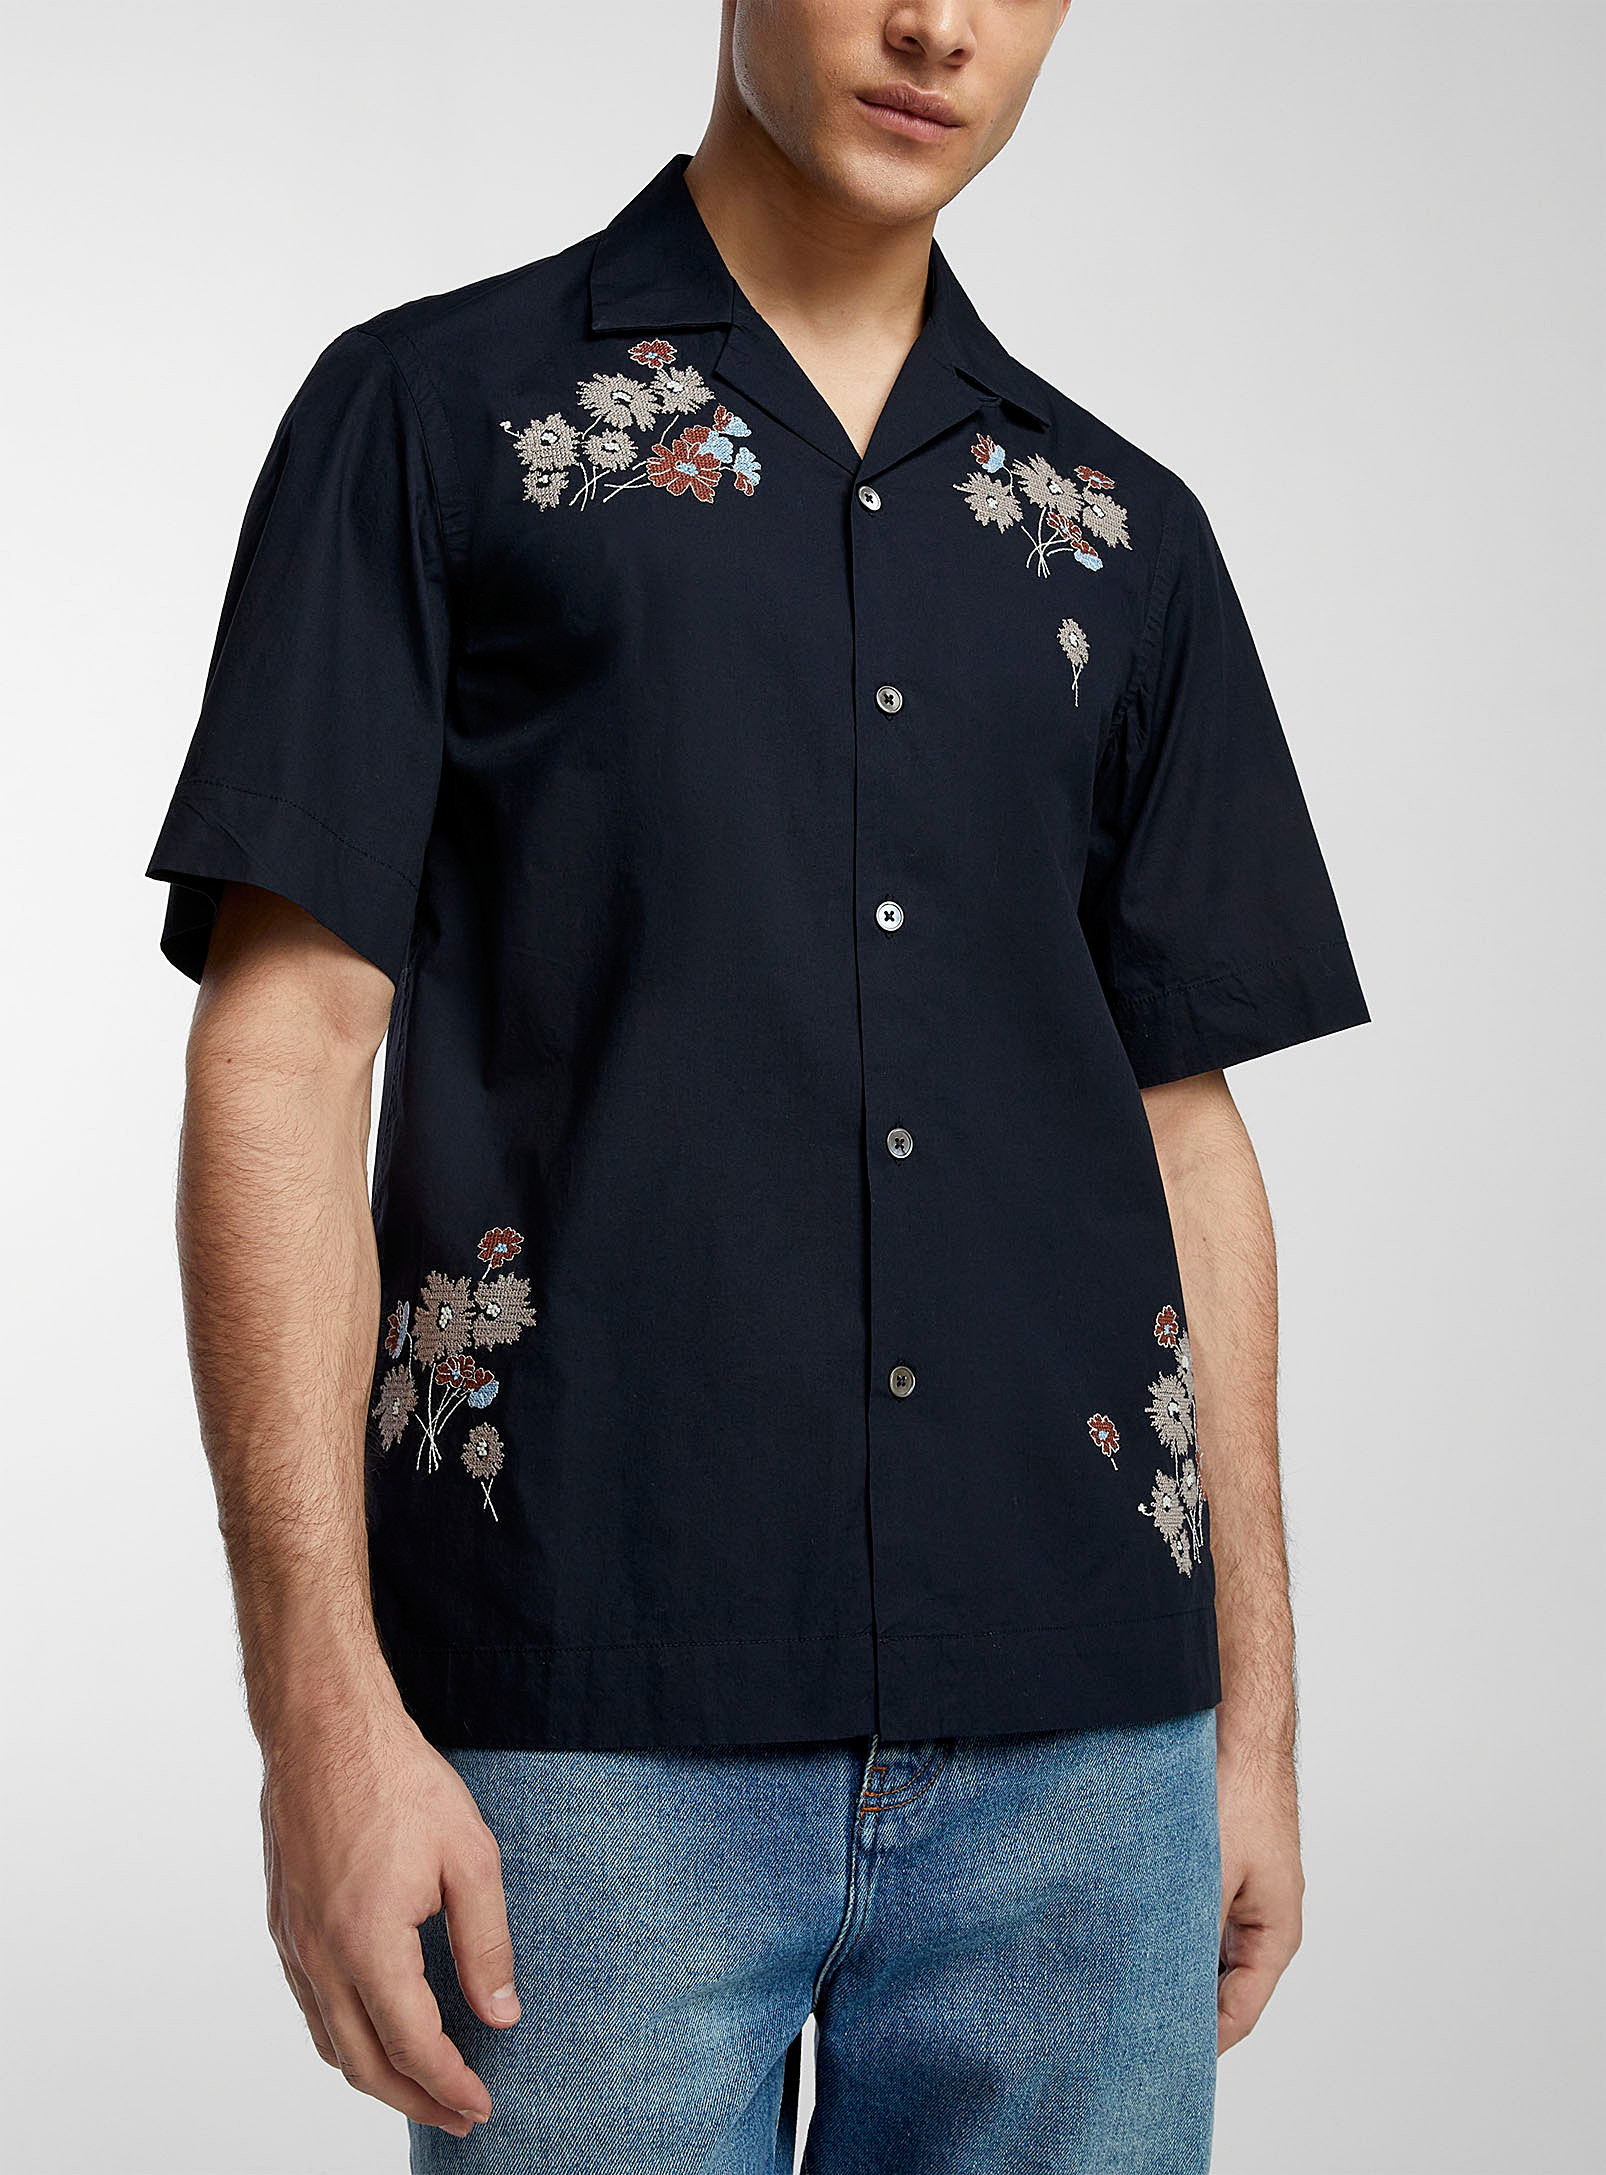 Paul Smith Embroidered Bouquets Shirt In Marine Blue